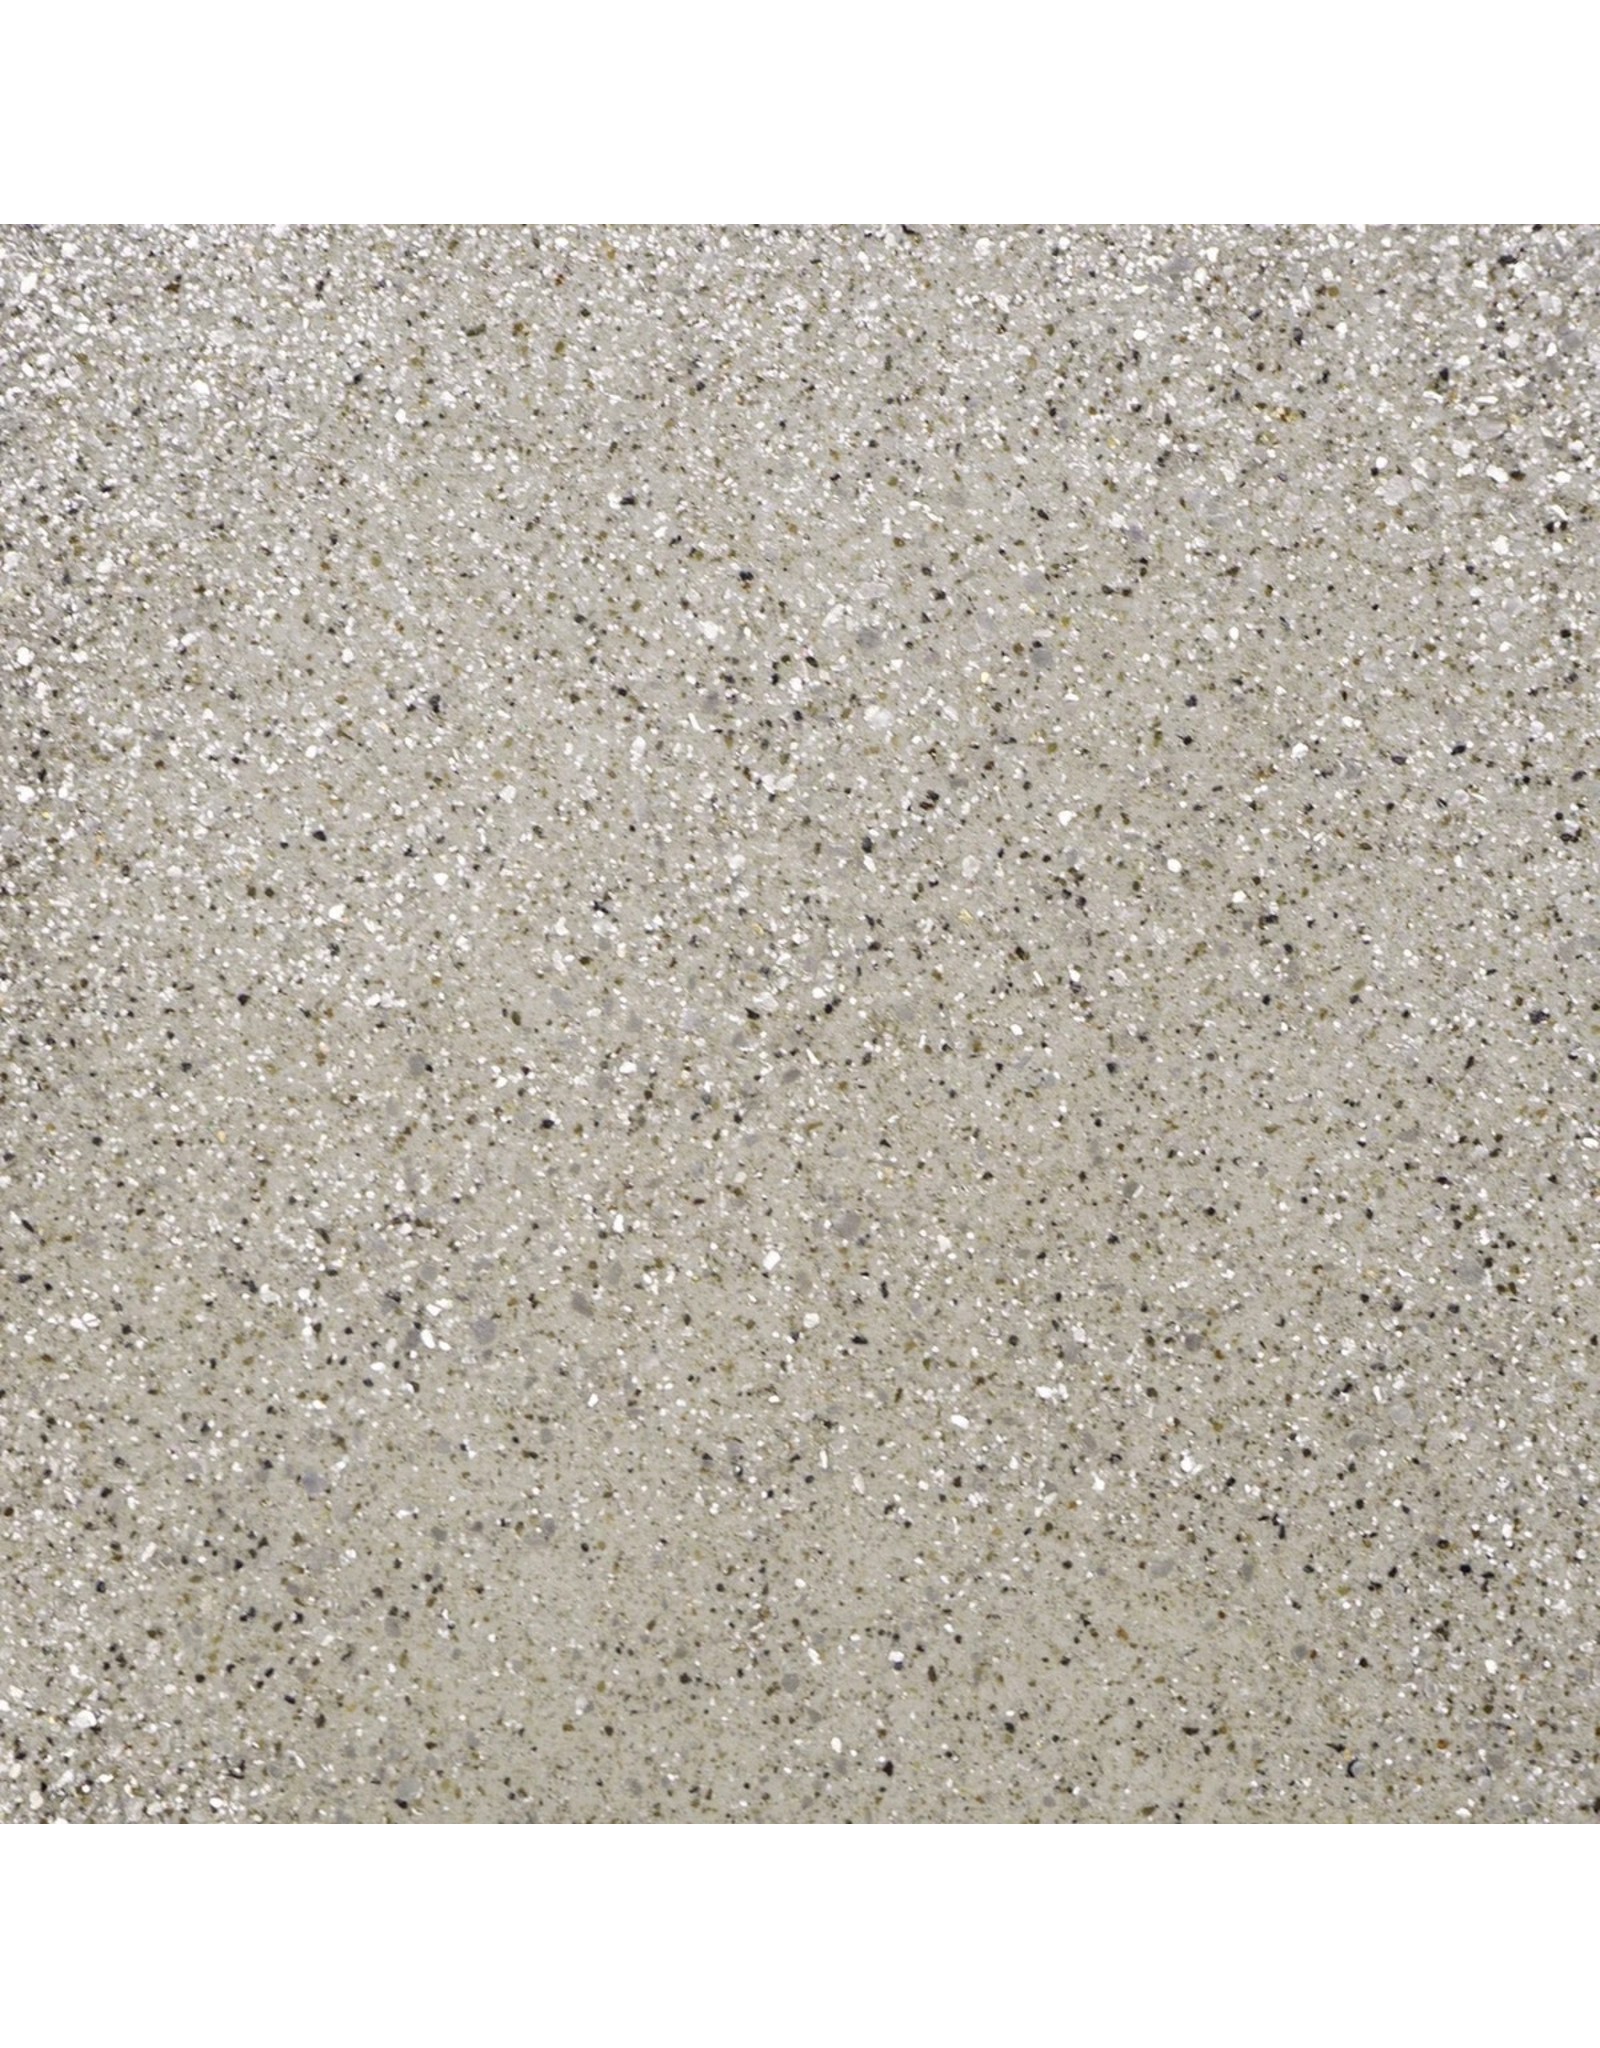 CREATIVE EXPRESSIONS CREATIVE EXPRESSIONS COSMIC SHIMMER BIANCO SILVER MINERAL MICA